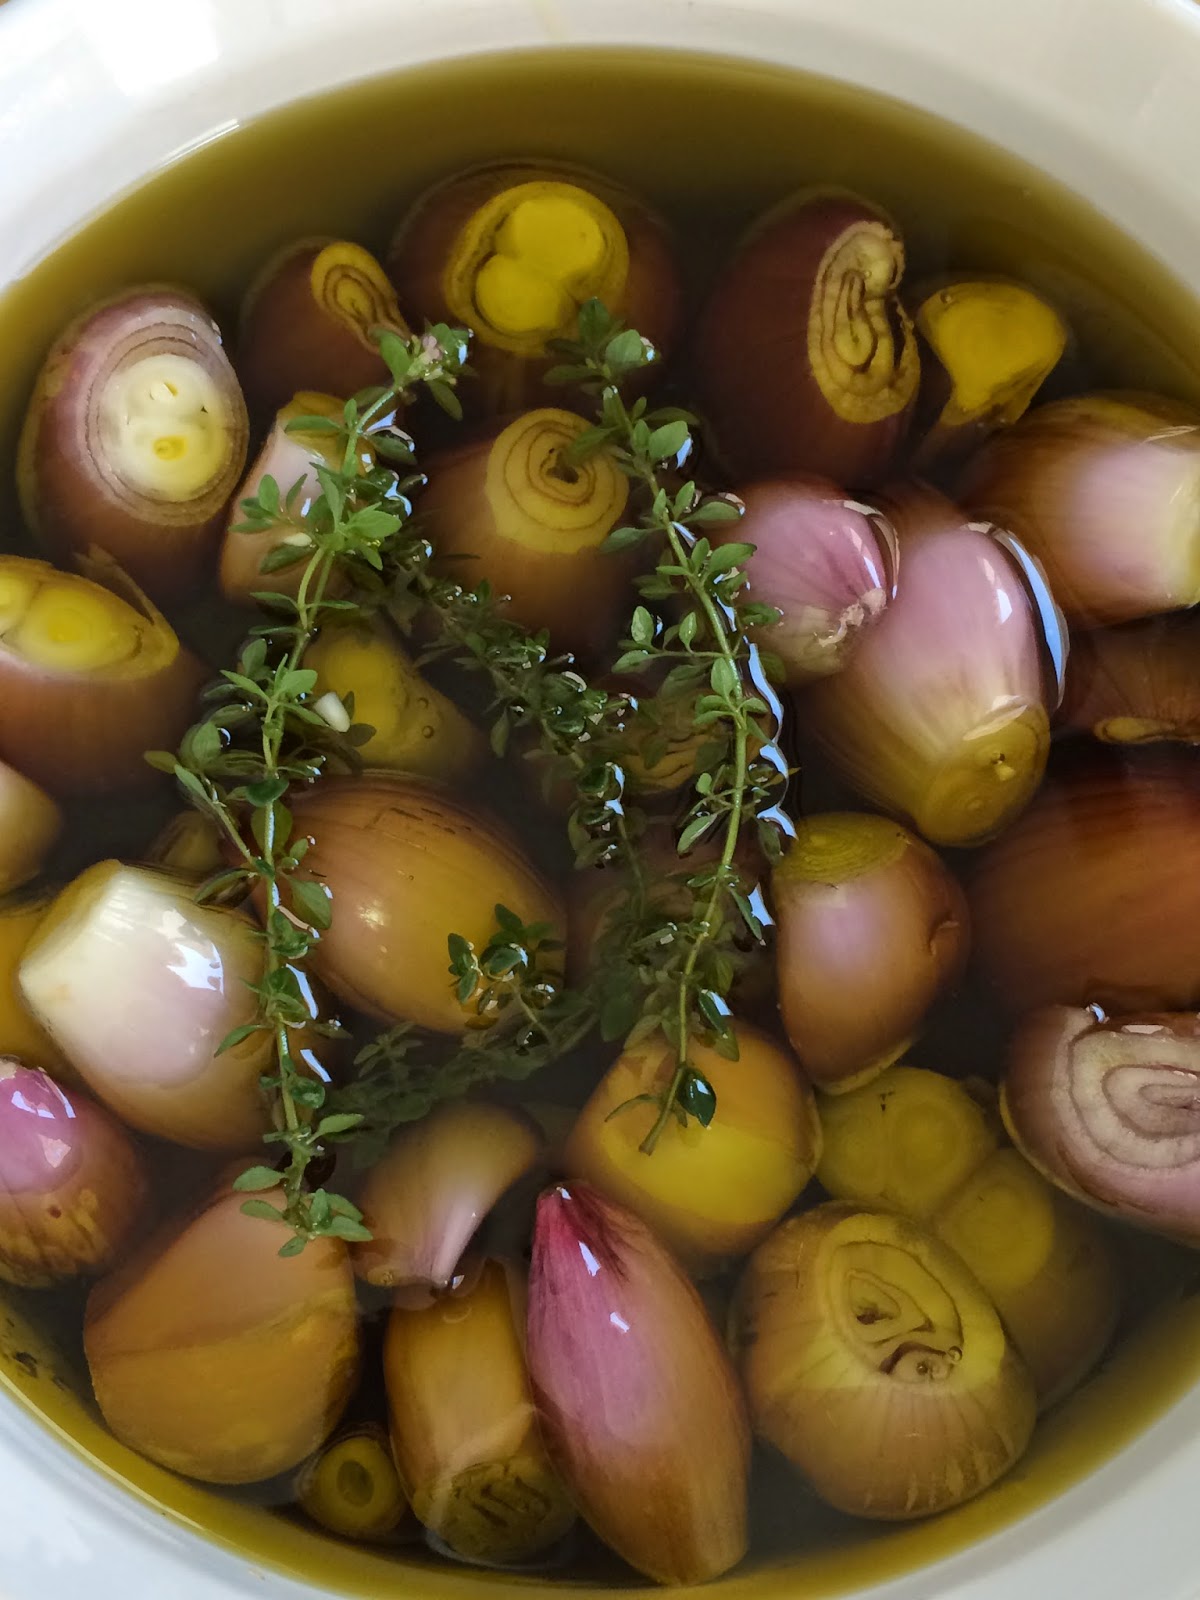 Onion and shallot confit